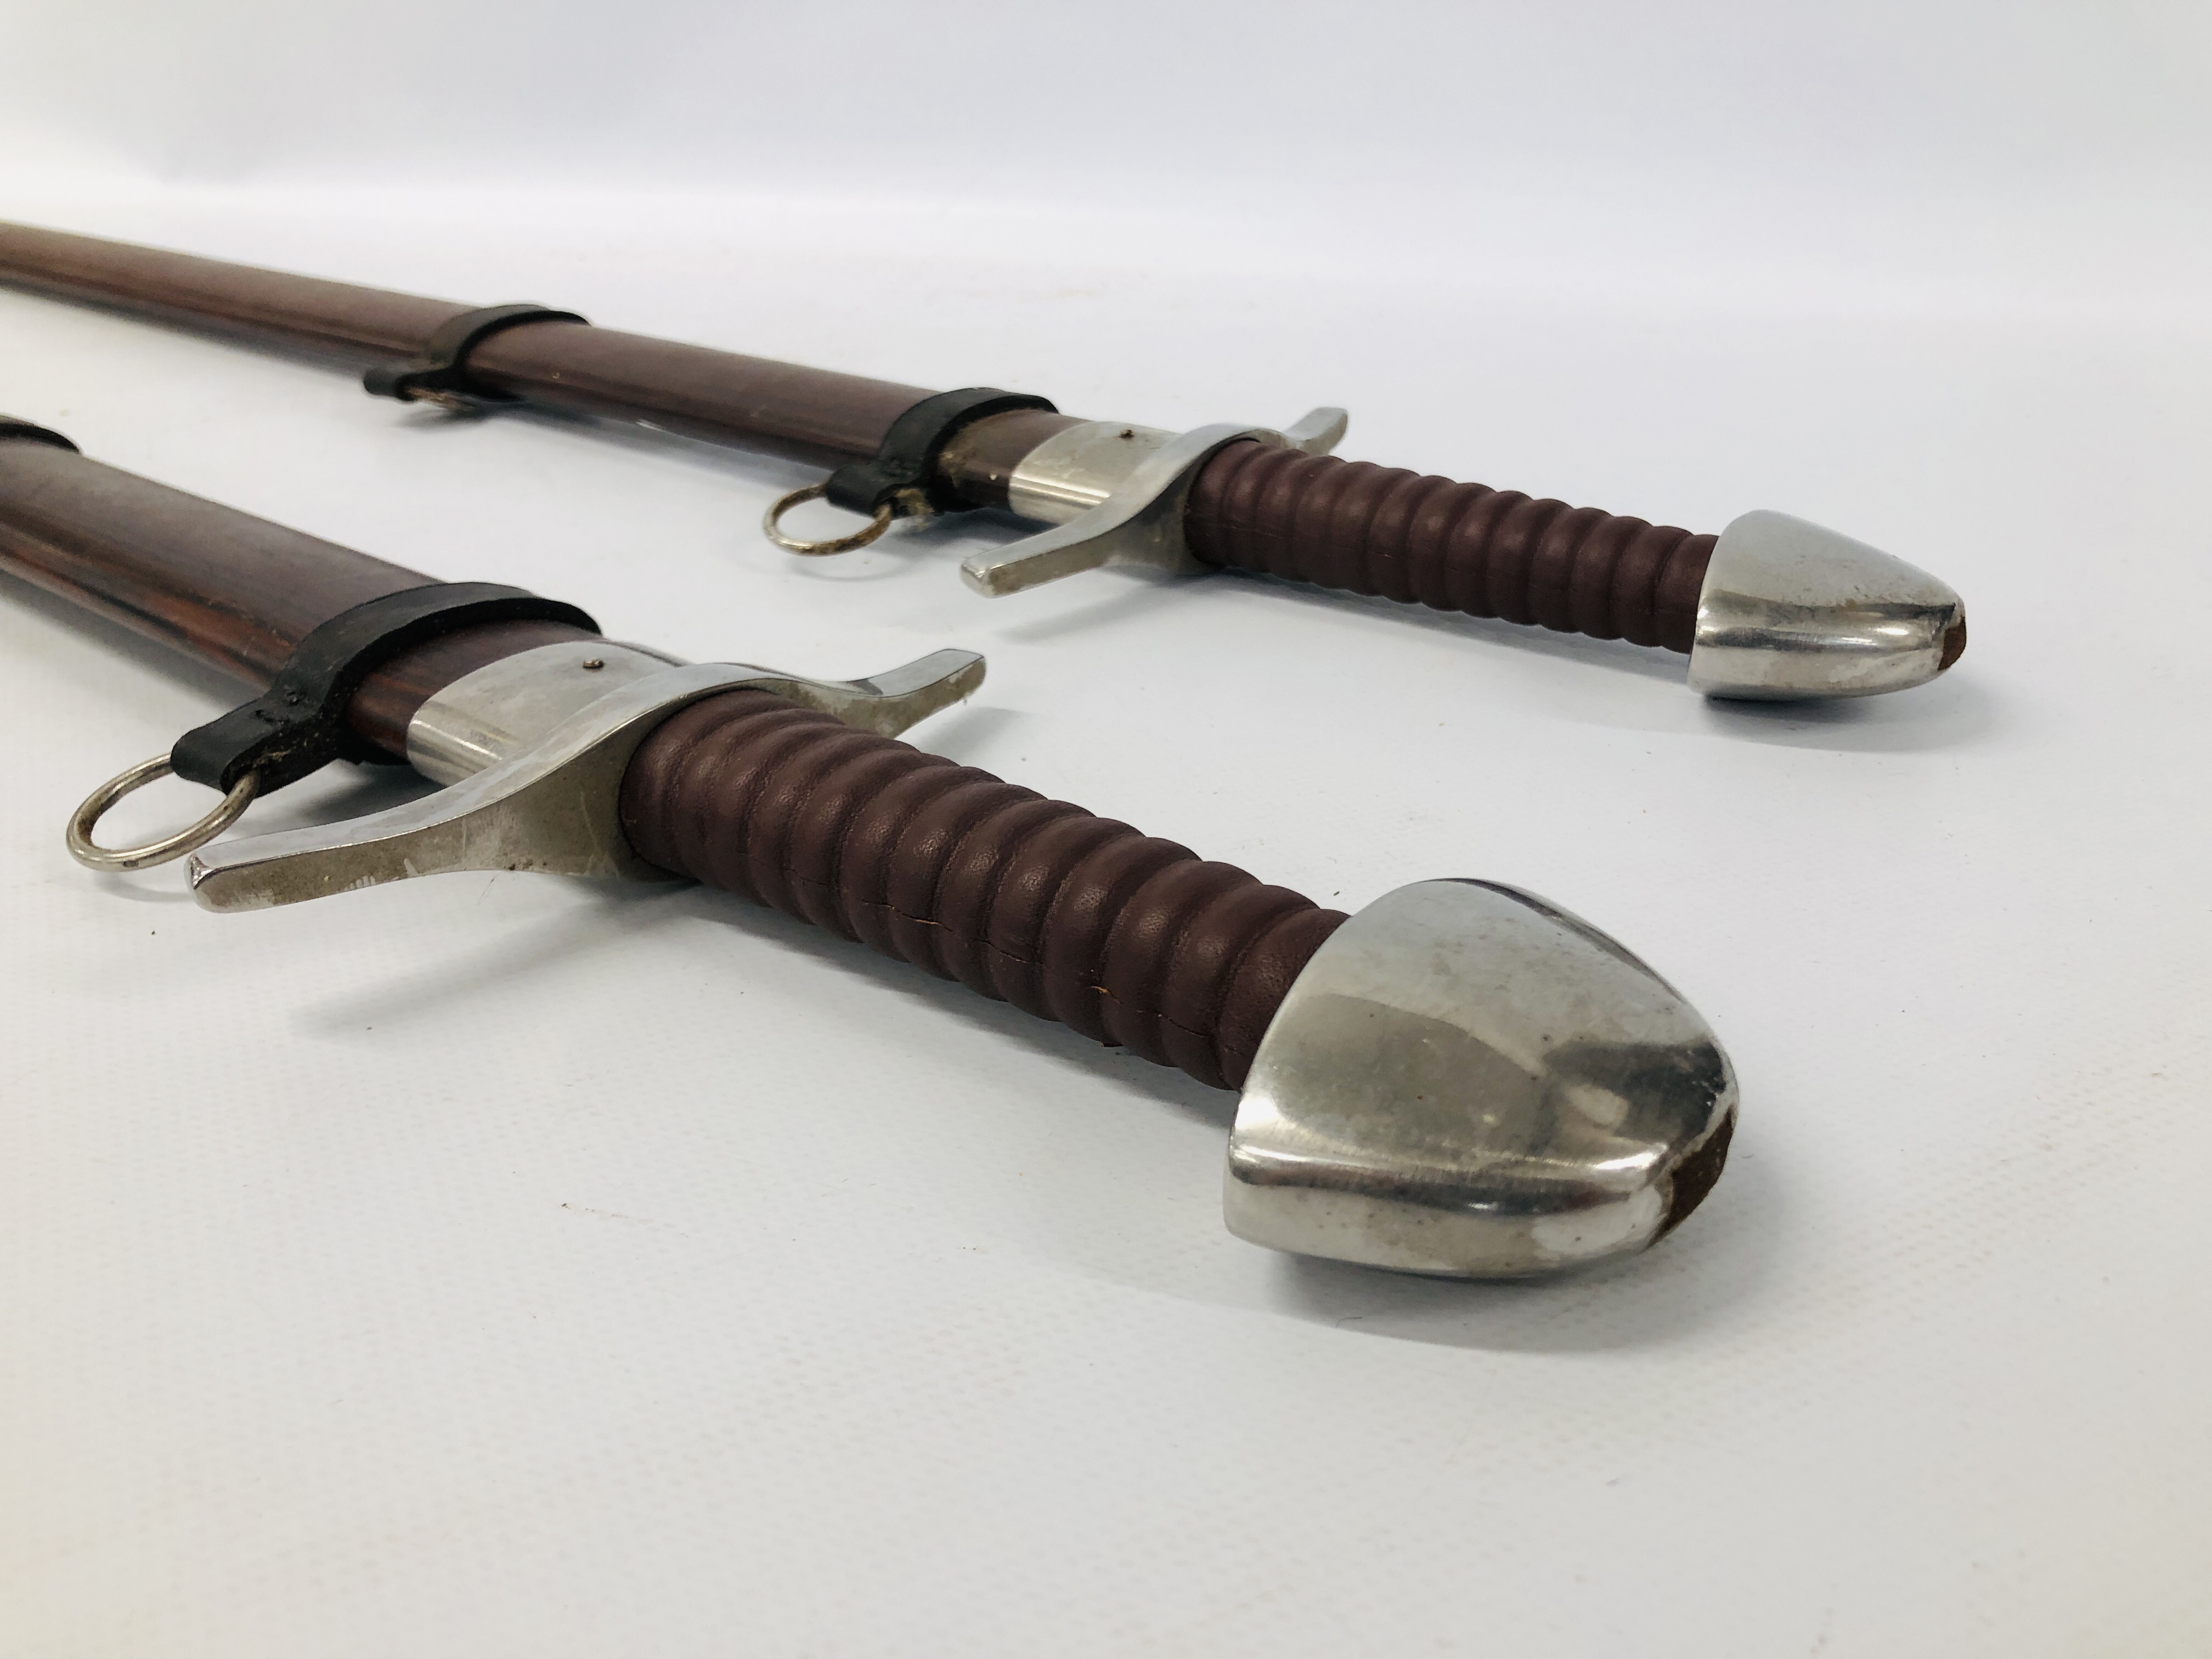 TWO REPLICA DISPLAY SWORDS IN SHEATHS - NO POSTAGE, COLLECTION ONLY - MUST BE 18 YEARS OF AGE. - Image 7 of 7